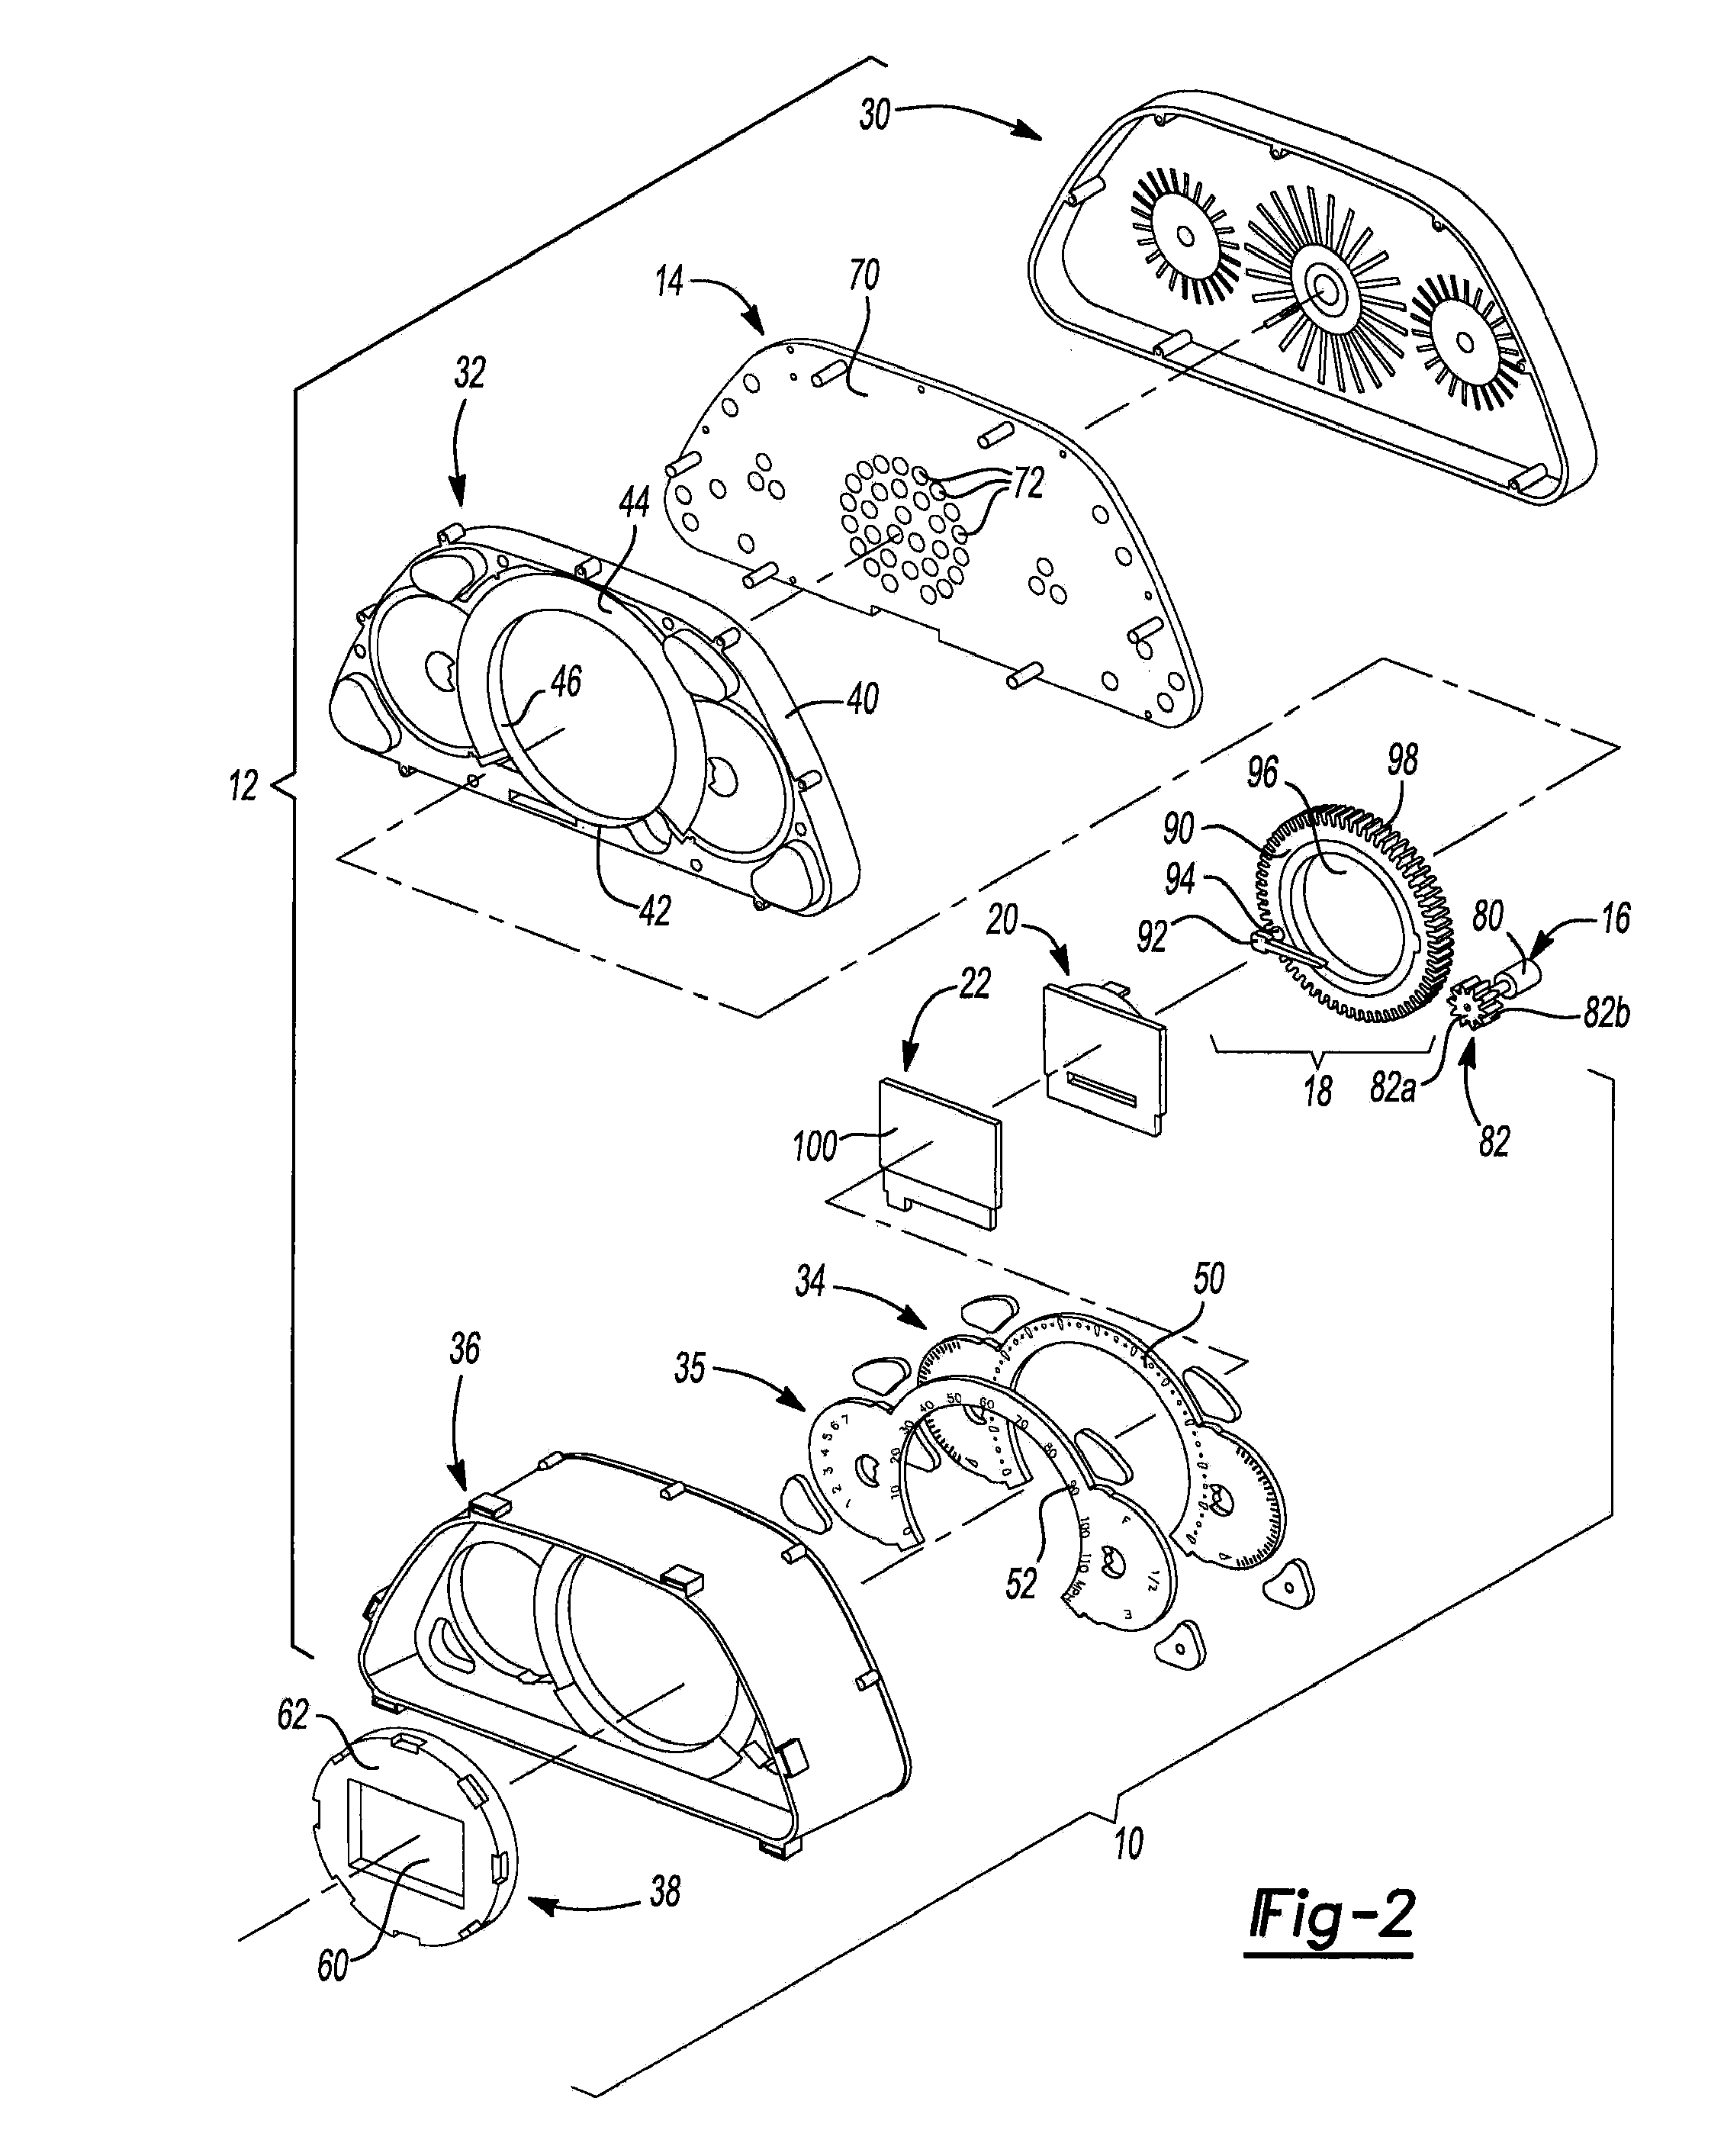 Instrument cluster with three-dimensional display